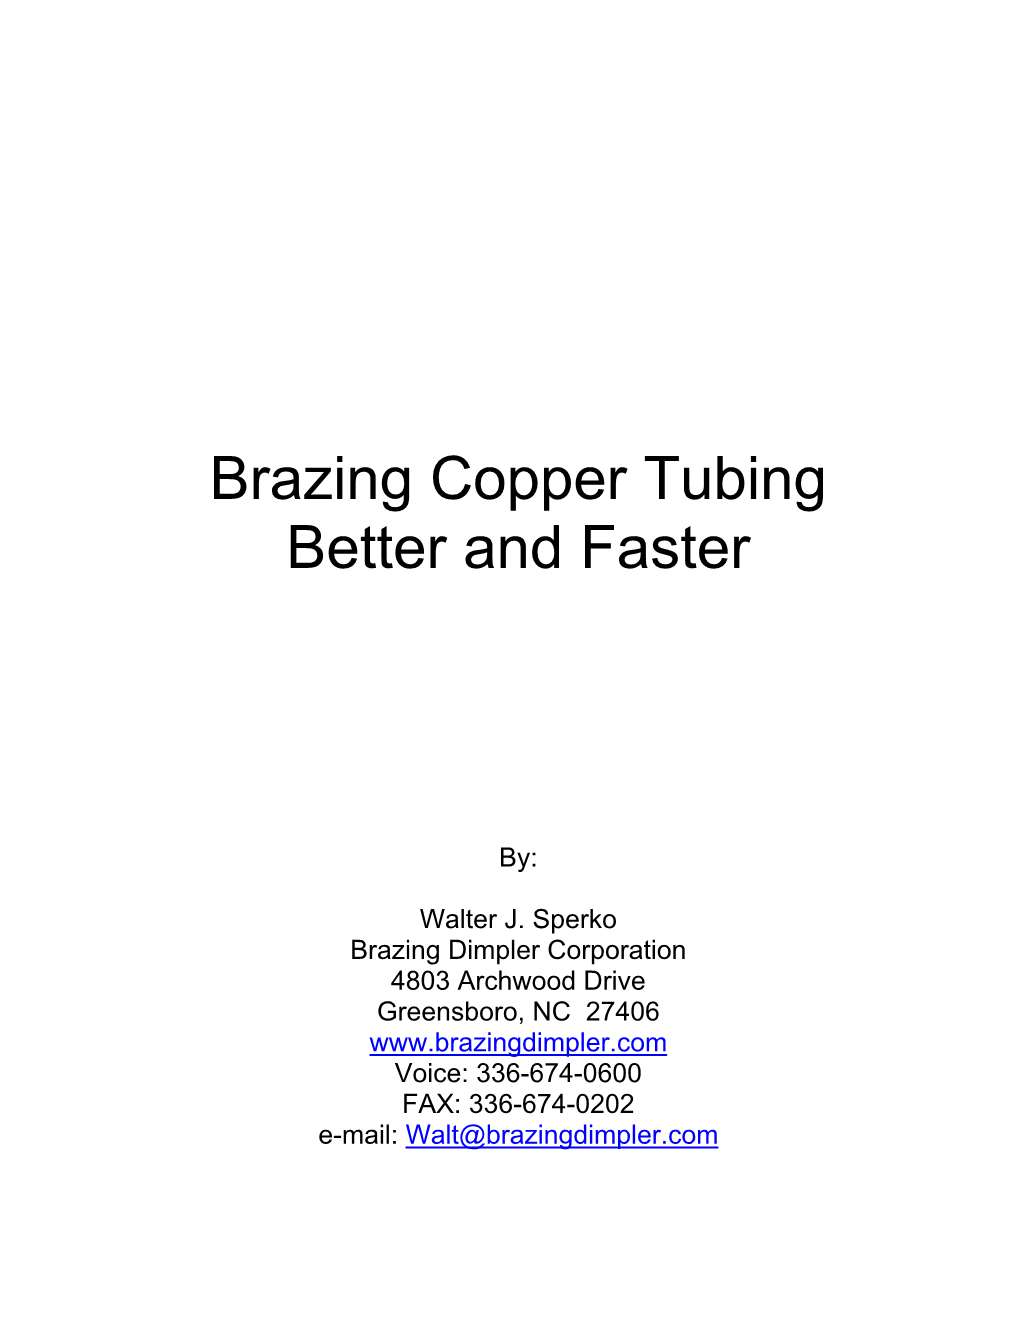 Brazing Copper Tubing Better and Faster